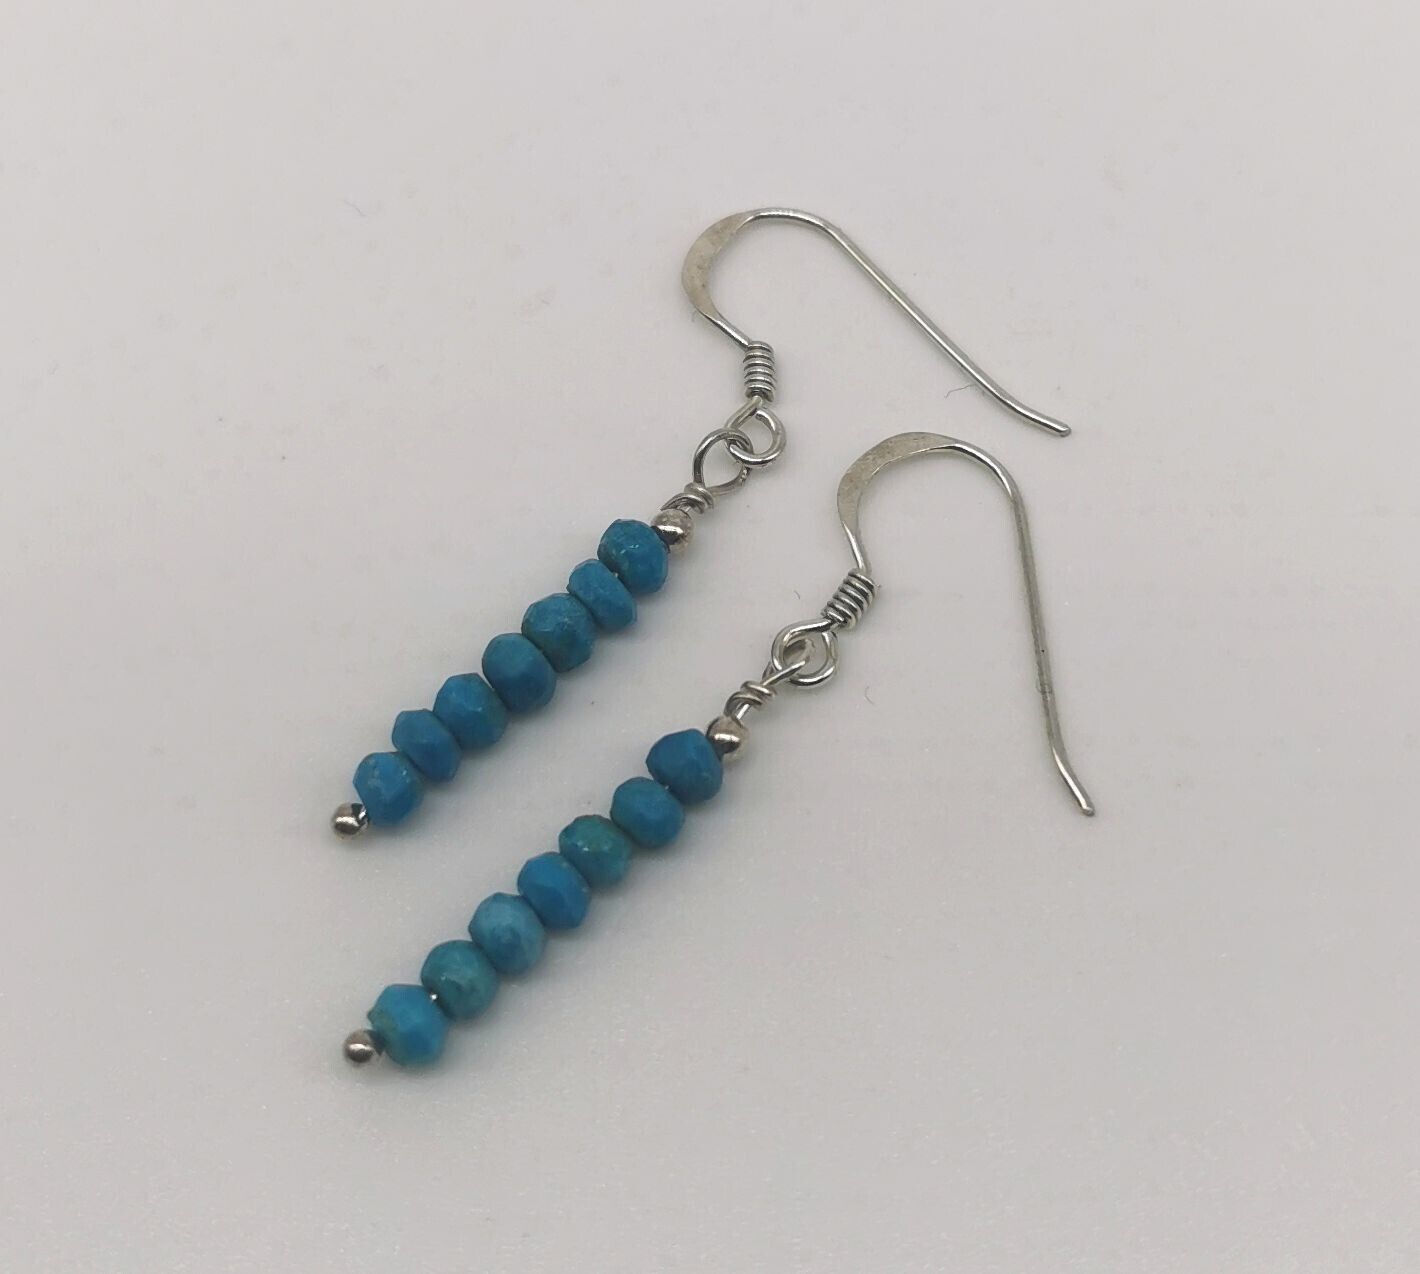 Blue Turquoise Faceted Beads 925 Sterling Silver Minimalist Artisan Earrings